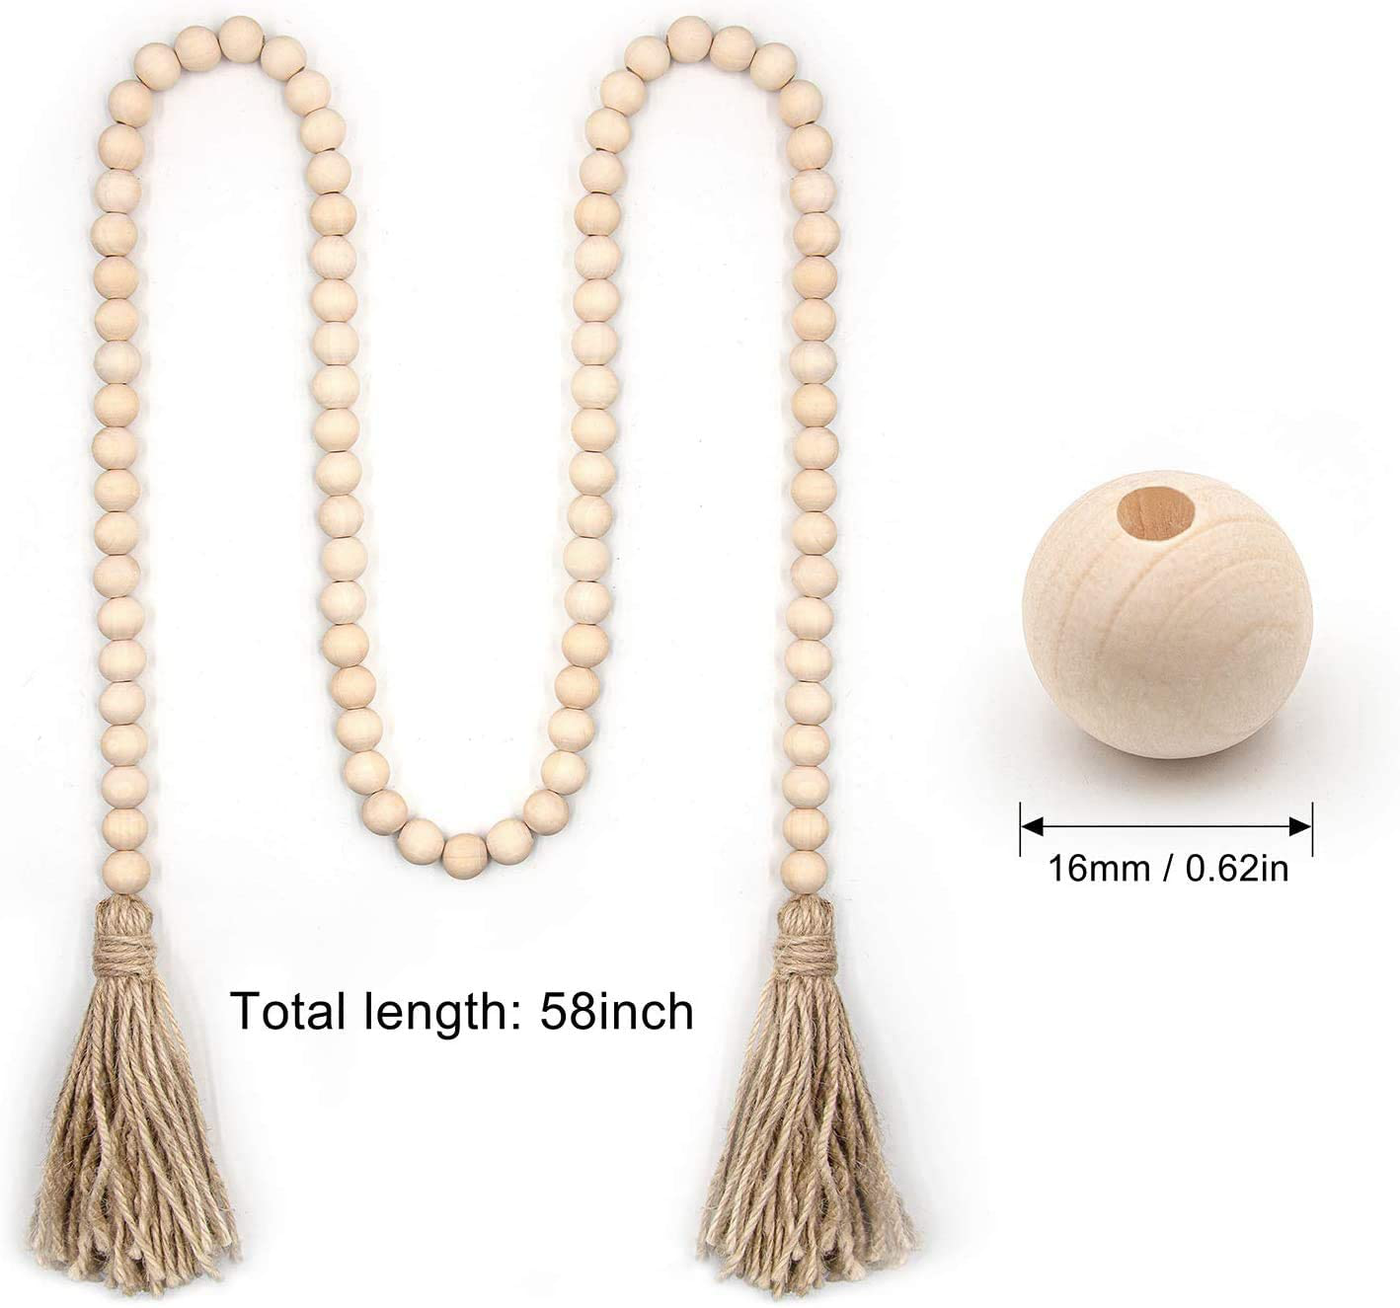 58in Wood Beads Garland Farmhouse Beads - Natural Prayer Wood String Beads Decorative Beads for Wall Hanging Vase Handle Door Decor